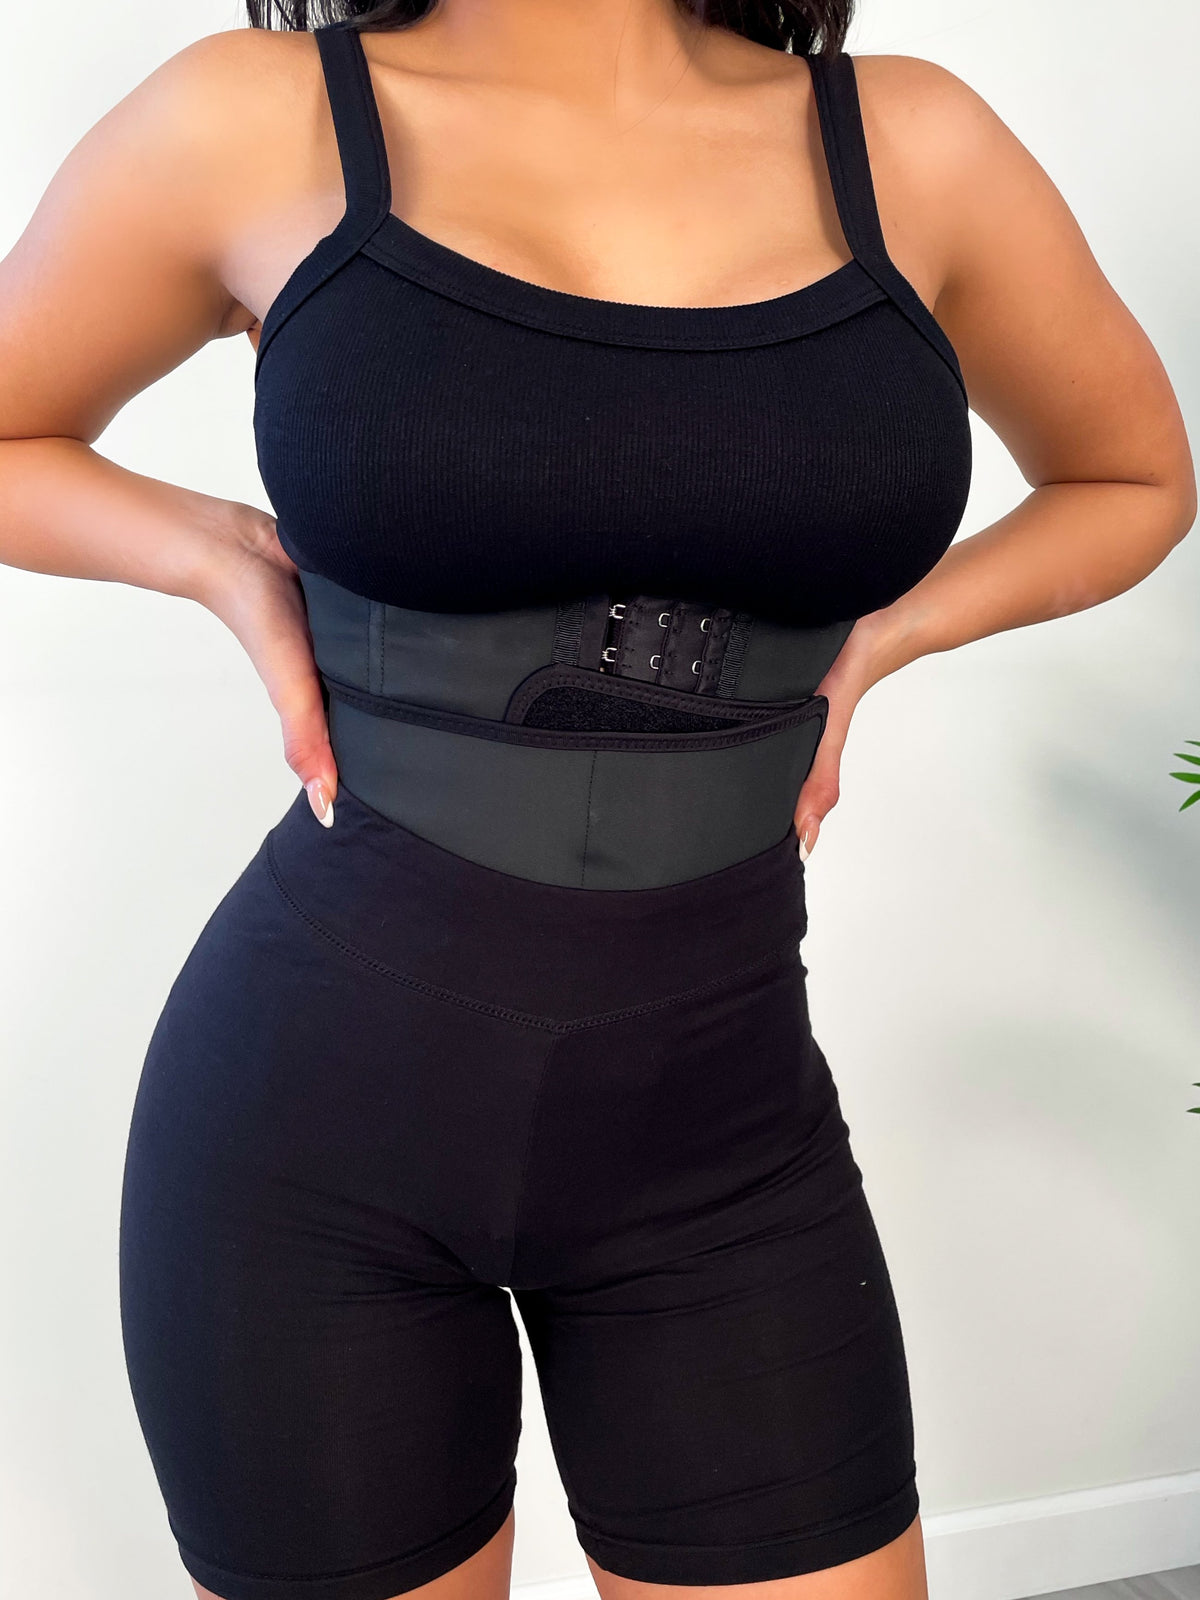 The Best Plus Size Waist Trainers to Buy In 2020